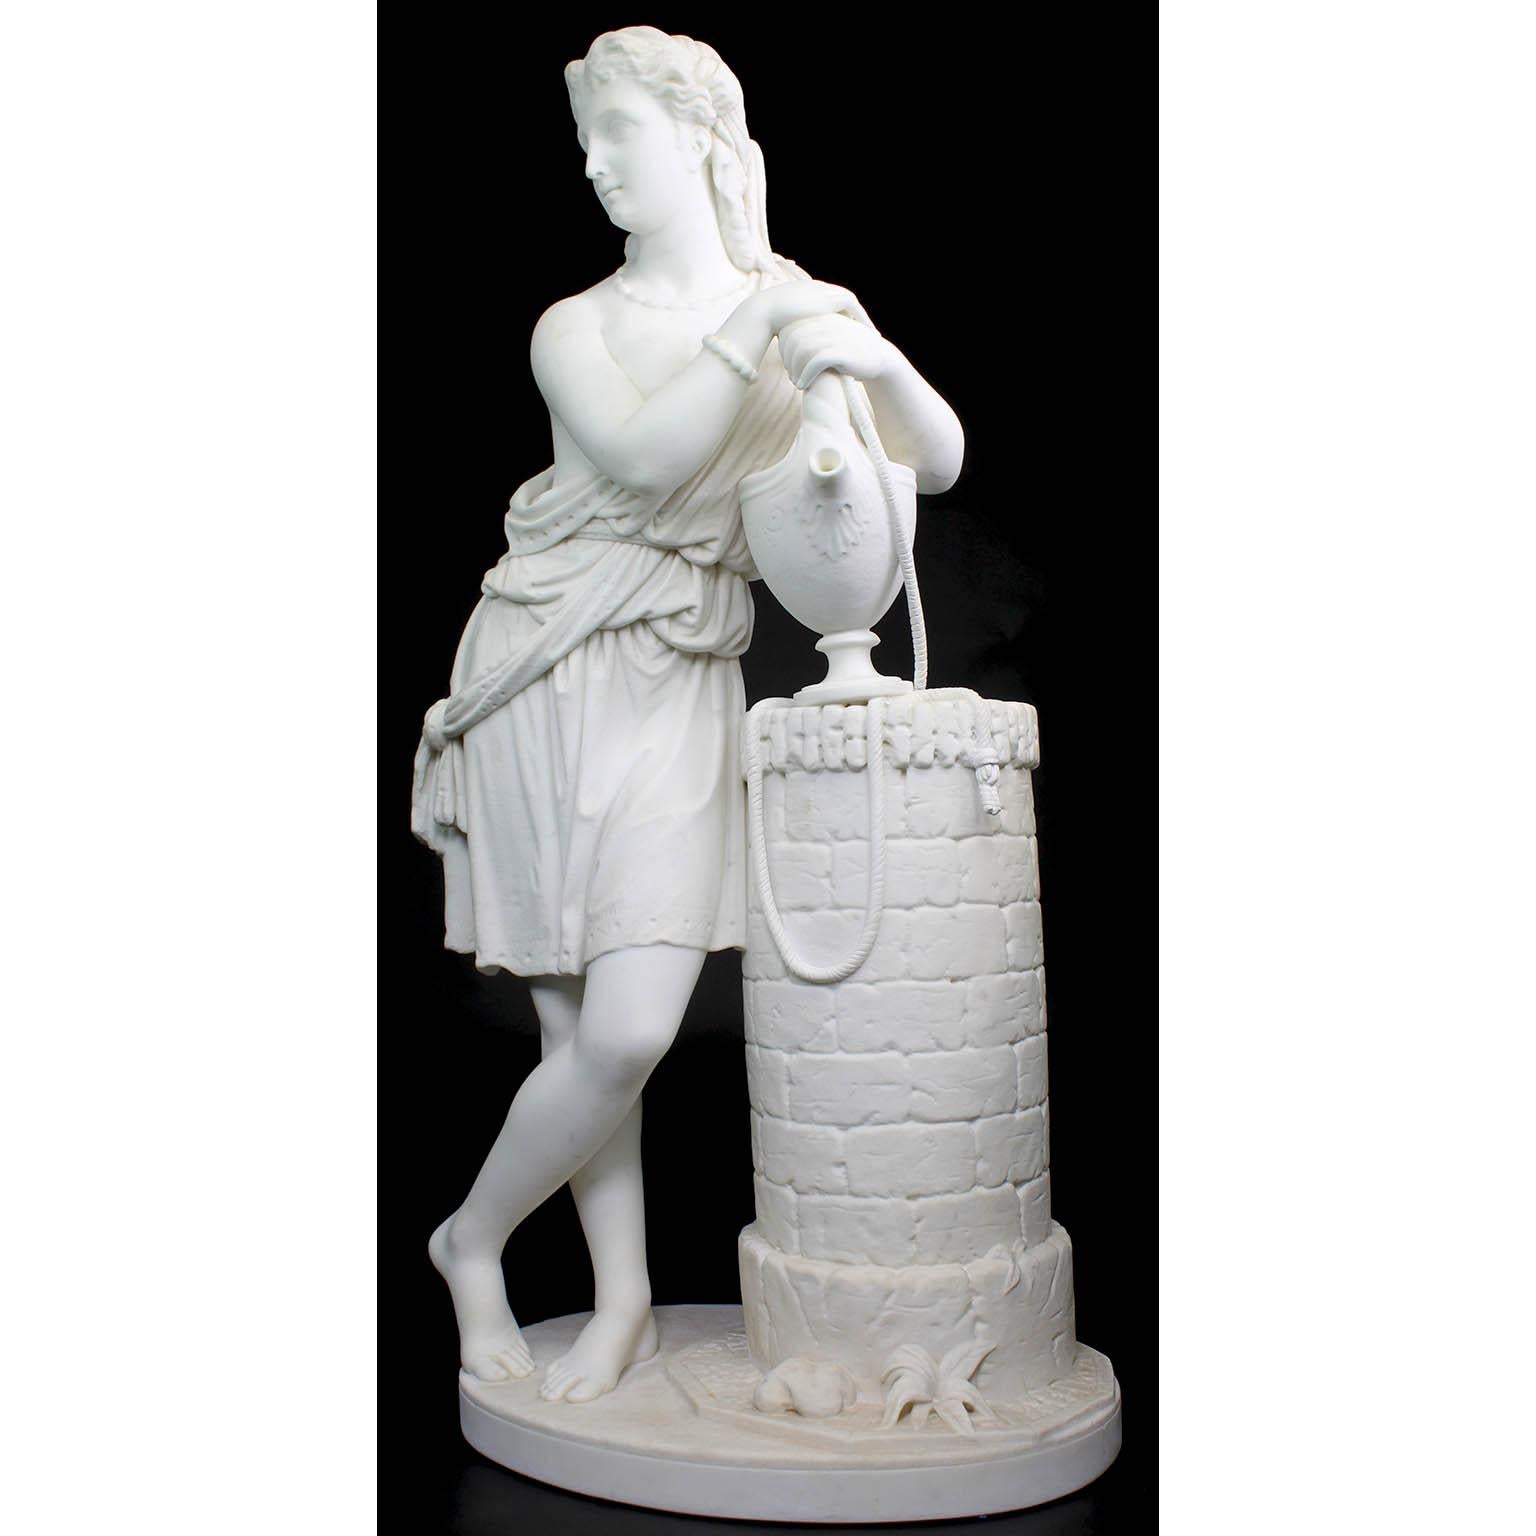 A Fine 19th century white marble sculpture of “Rebecca at The Well” depicting a Classical maiden wearing a robe, with one breast semi-exposed, standing next to a well holding a water urn. Probably Italian Carrara Marble. Artist unknown. Circa: